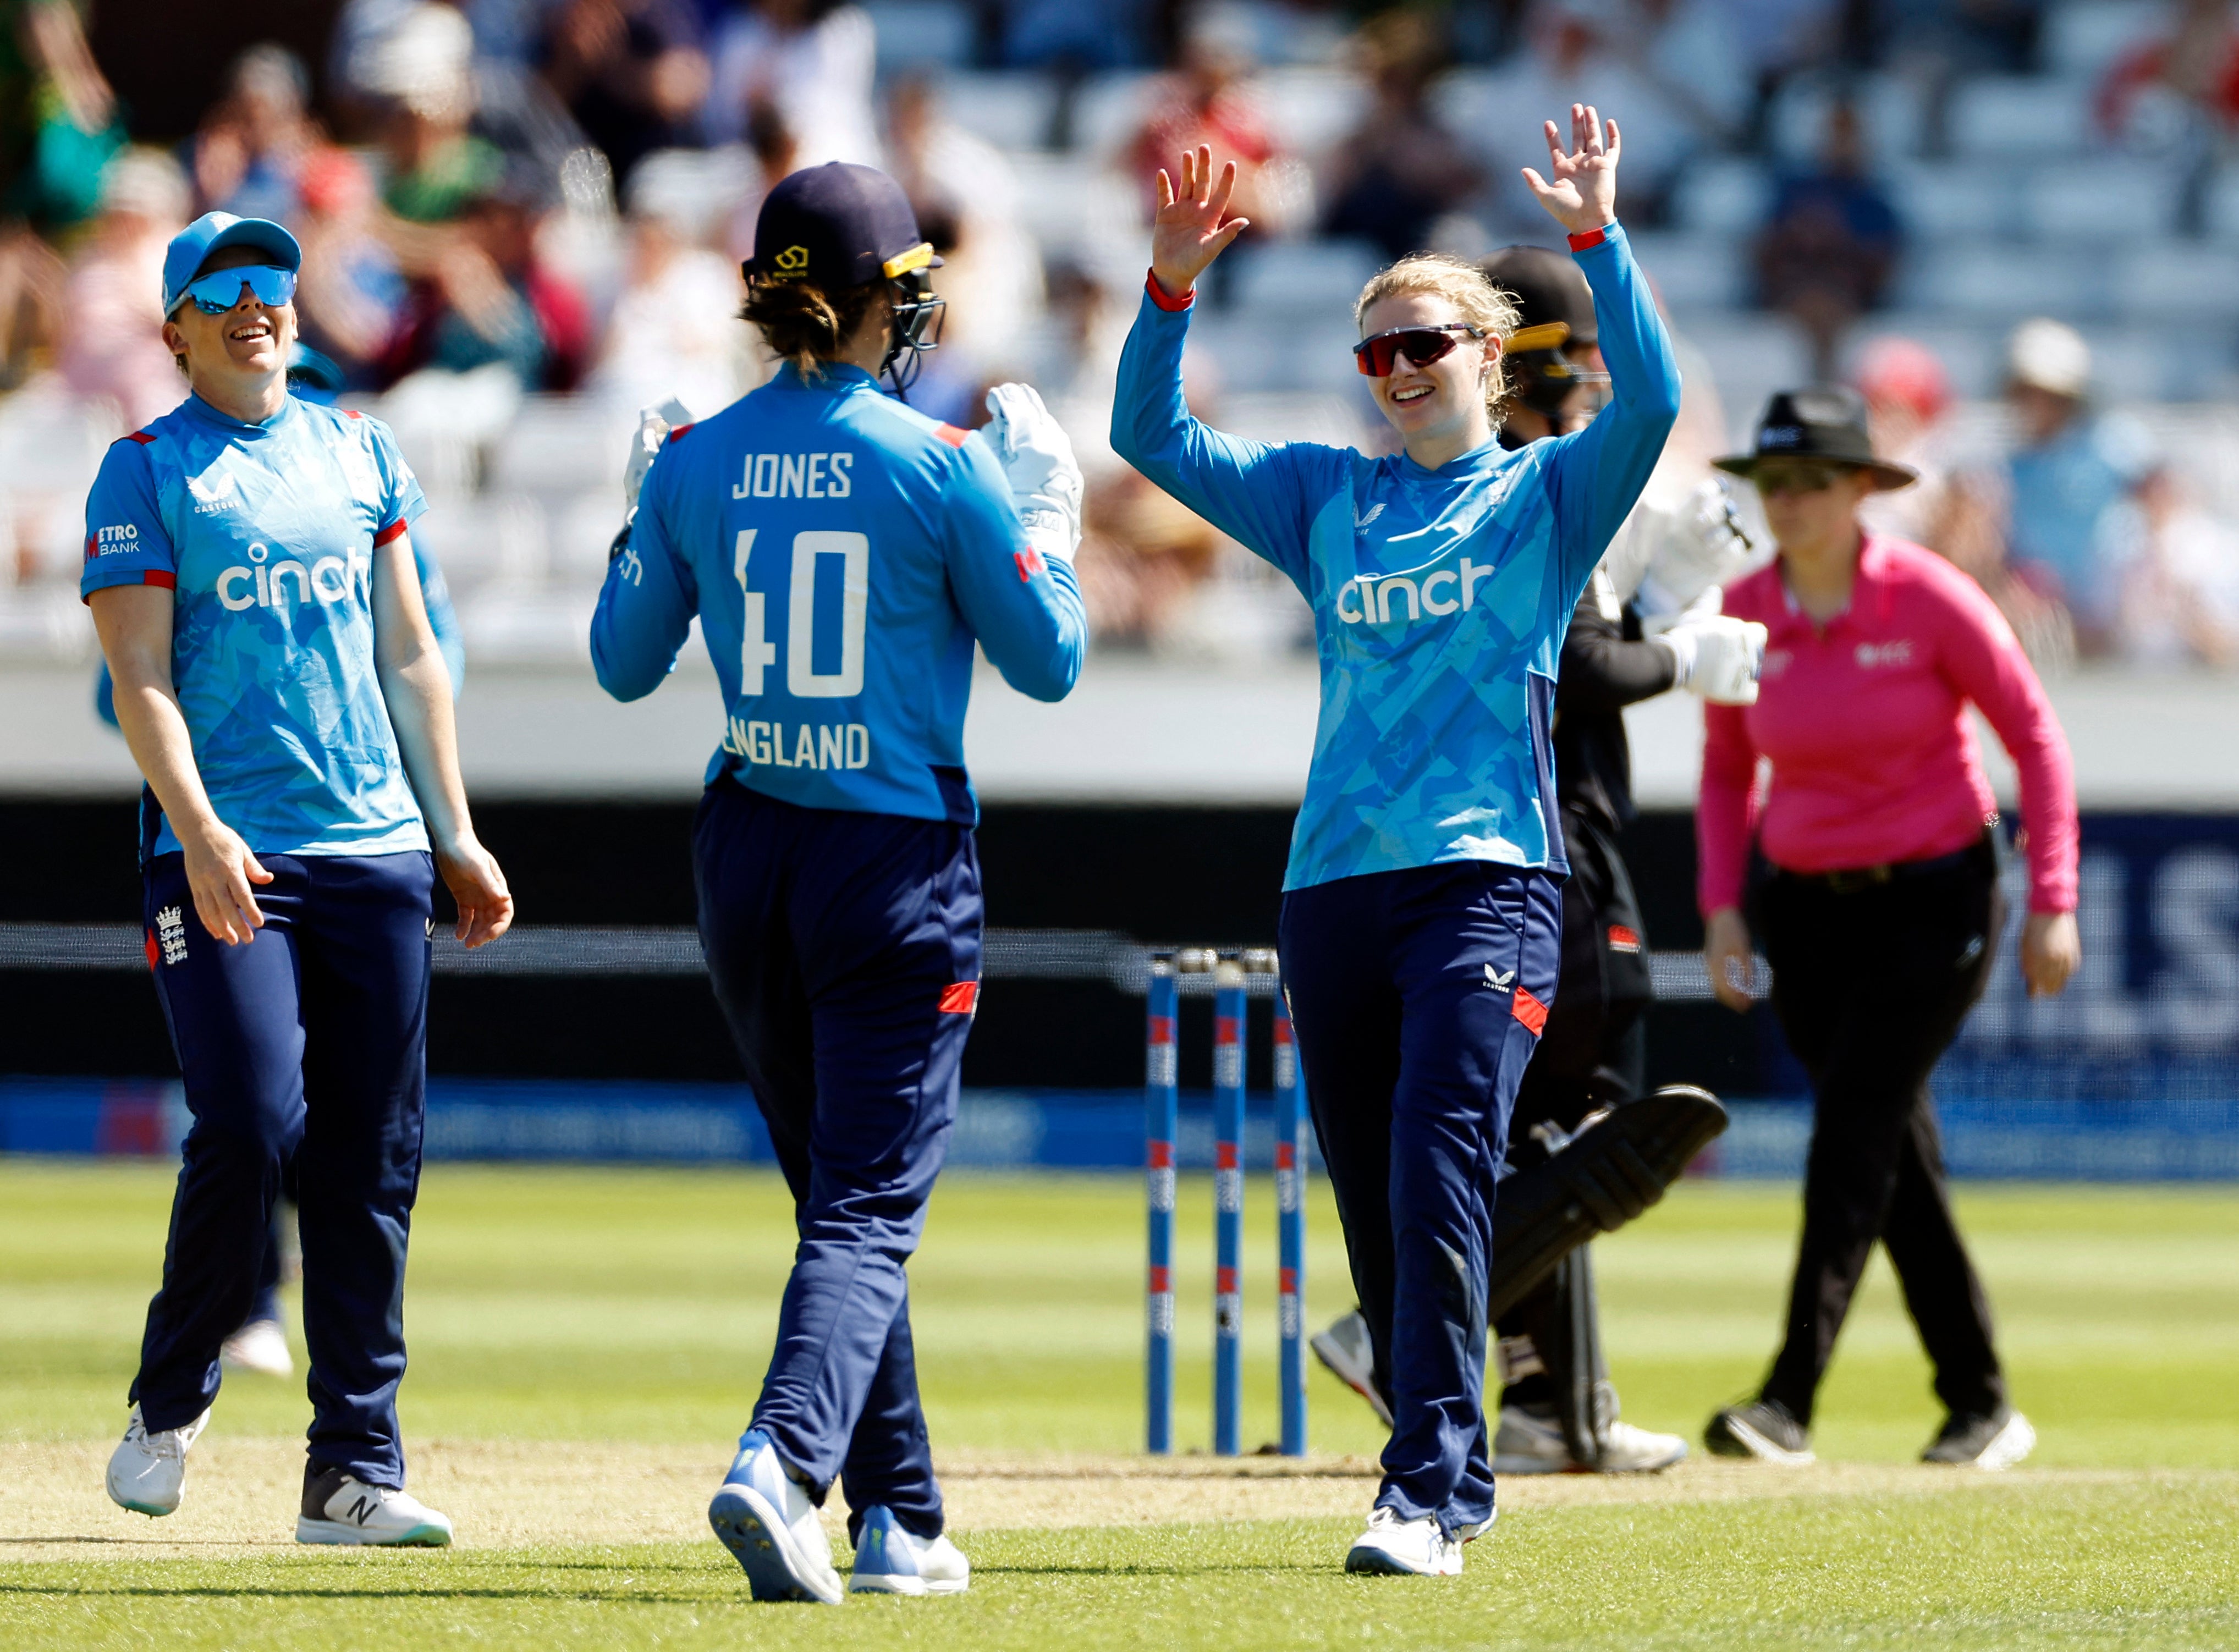 Charlie Dean took four wickets as England restricted New Zealand in the first ODI.